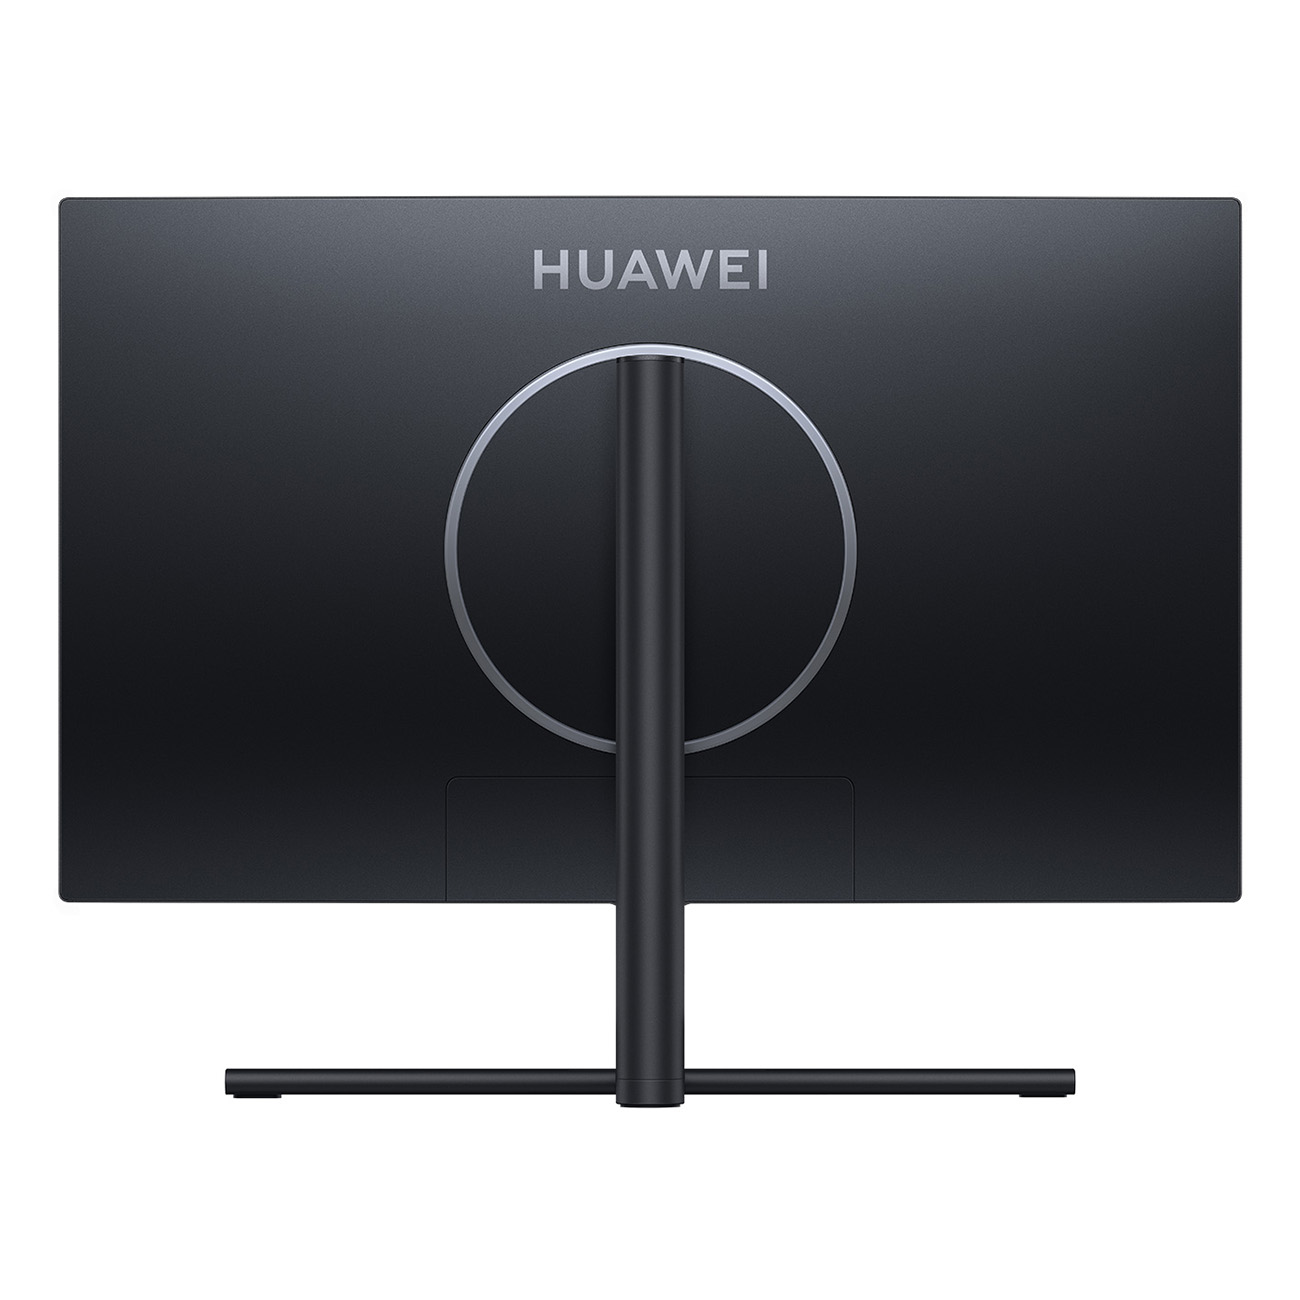 HUAWEI MateView Hz Zoll 165 Curved , , nativ) 165 27 Reaktionszeit GT (4 Full-HD (XWU-CBA) 27 Hz ms Monitor